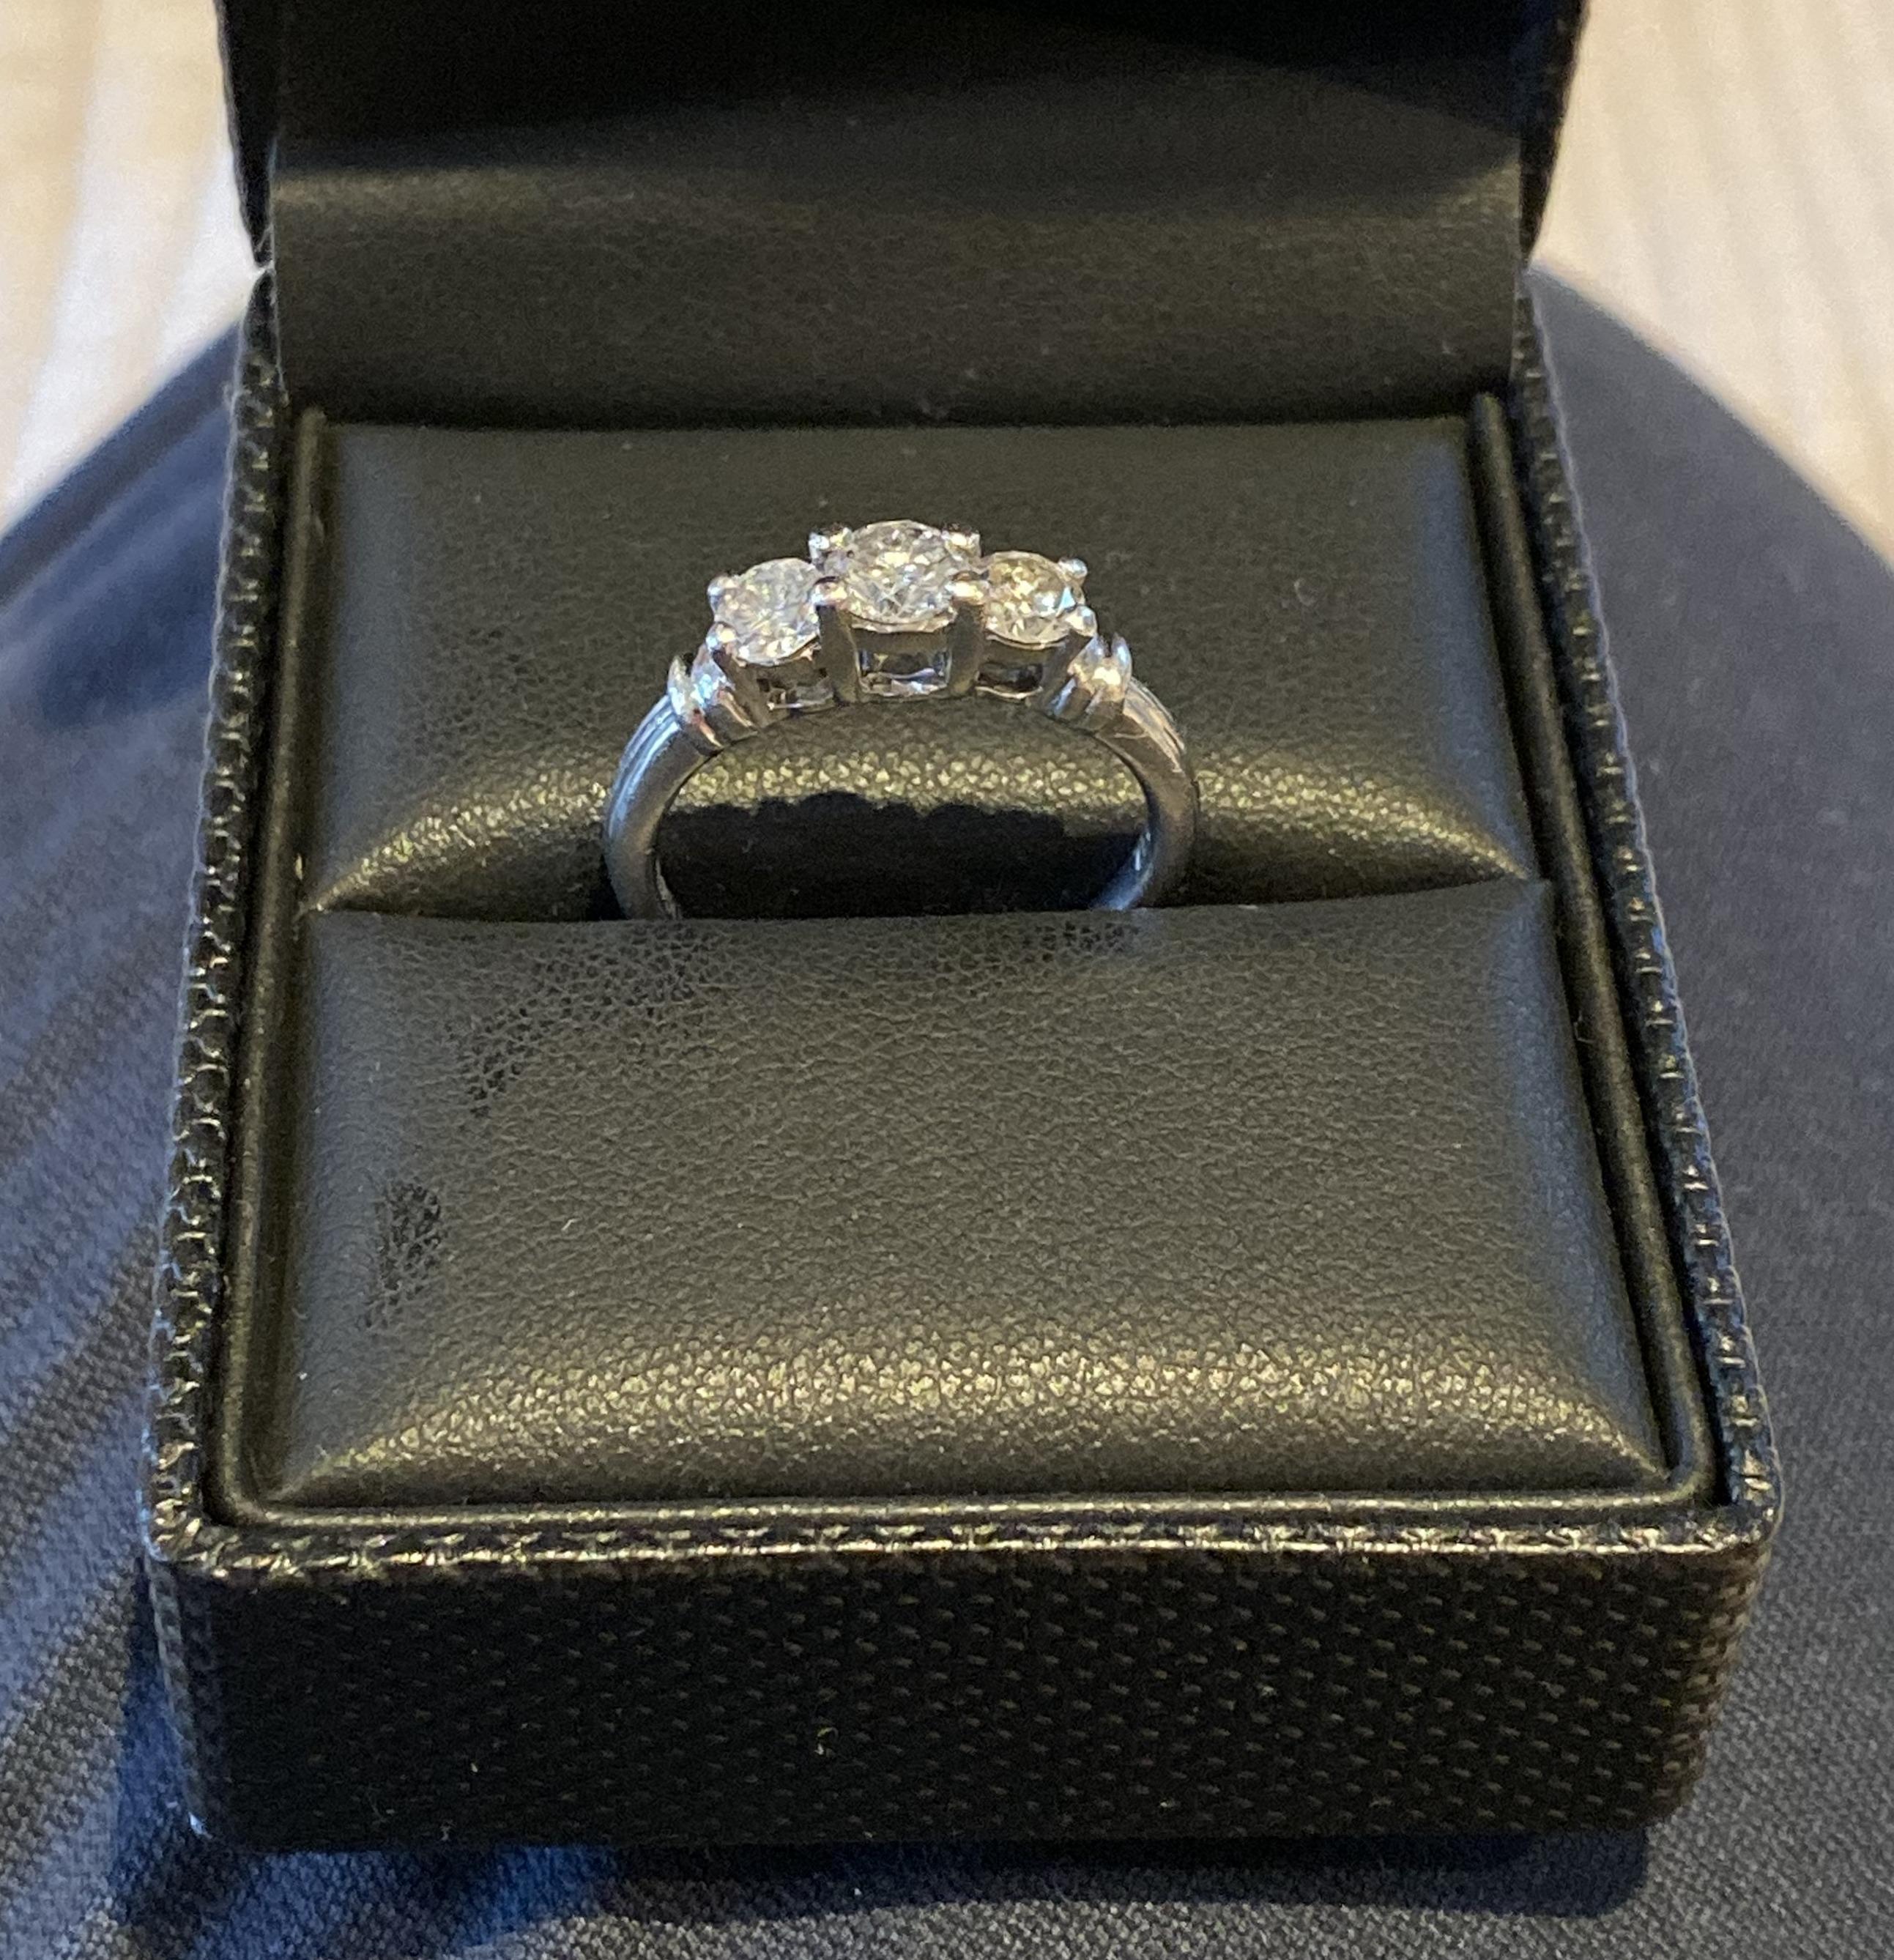 
Wimbledon-Furniture are delighted to offer for auction this Stunning Bradleys 3 stone 1.0ct diamond ring in a four claw platinum 950 setting

A very good looking ring with bright clear diamonds, this would be ideal as an engagement or eternity